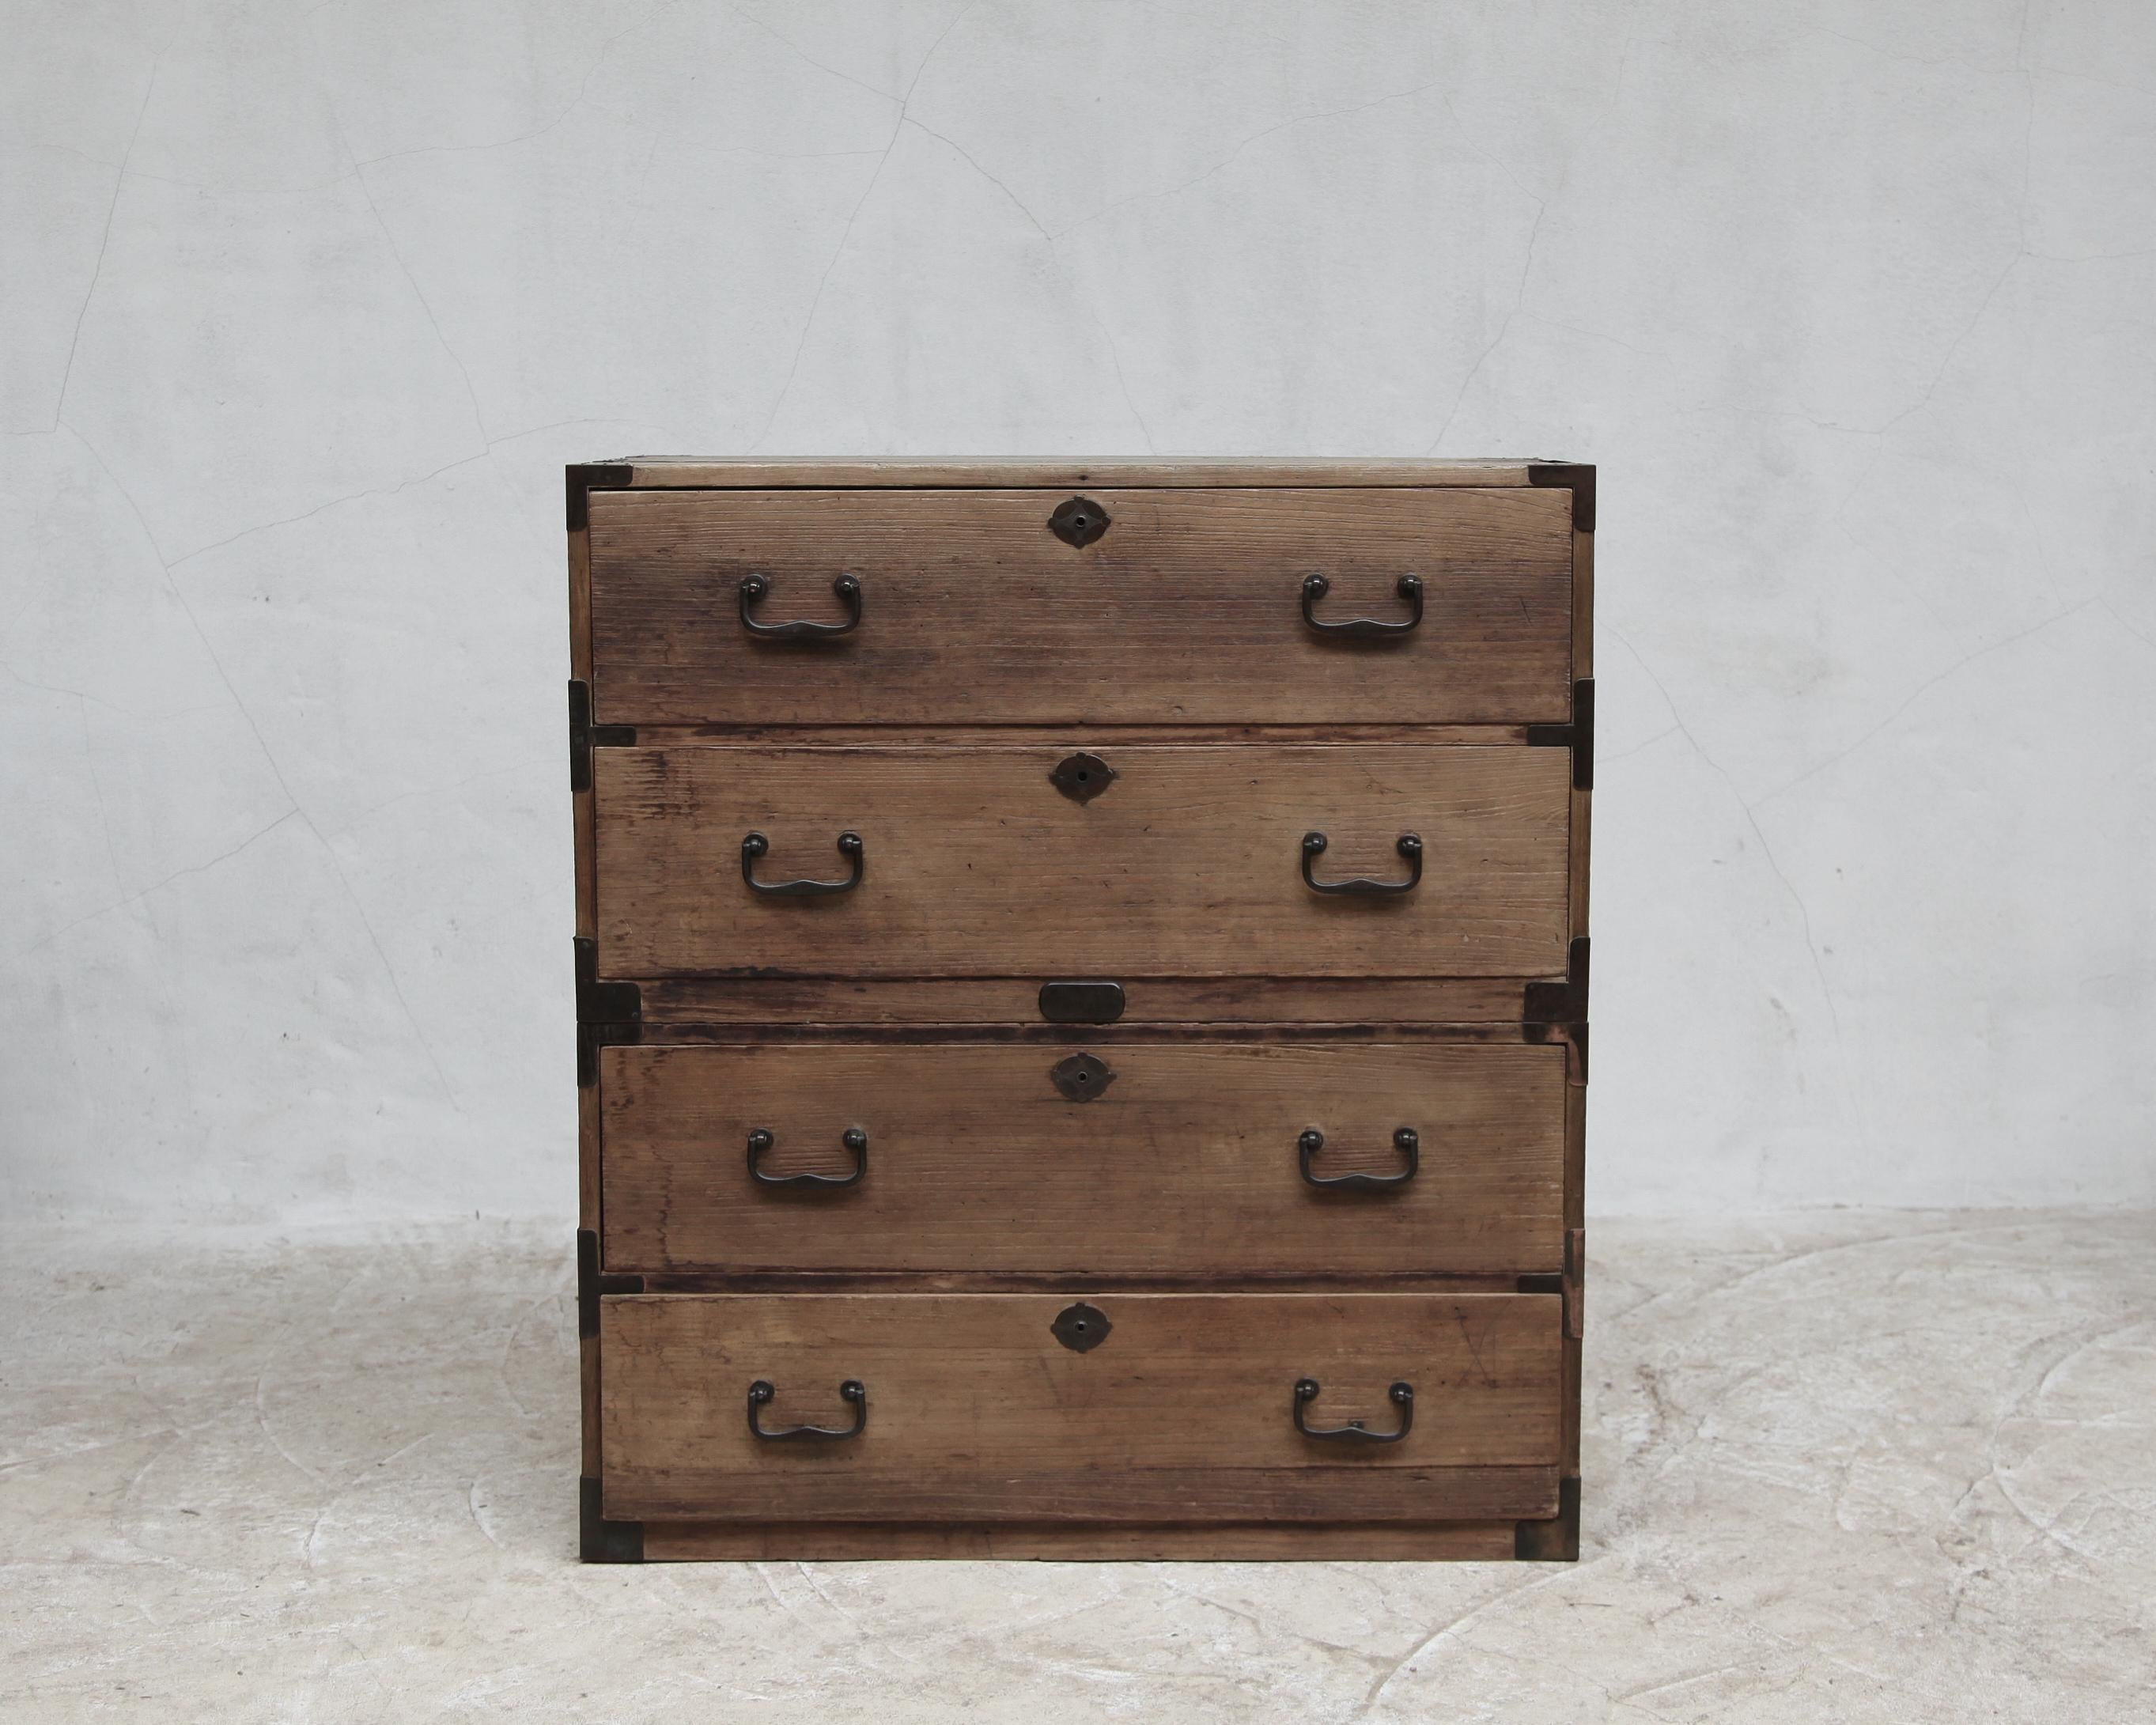 A bleached-out 19th C. (early Meiji) Japanese two part campaign tansu/chest of drawers.

Constructed in cedar (no moths!) with bronze and iron hardware.

Sympathetically restored in our London workshop.